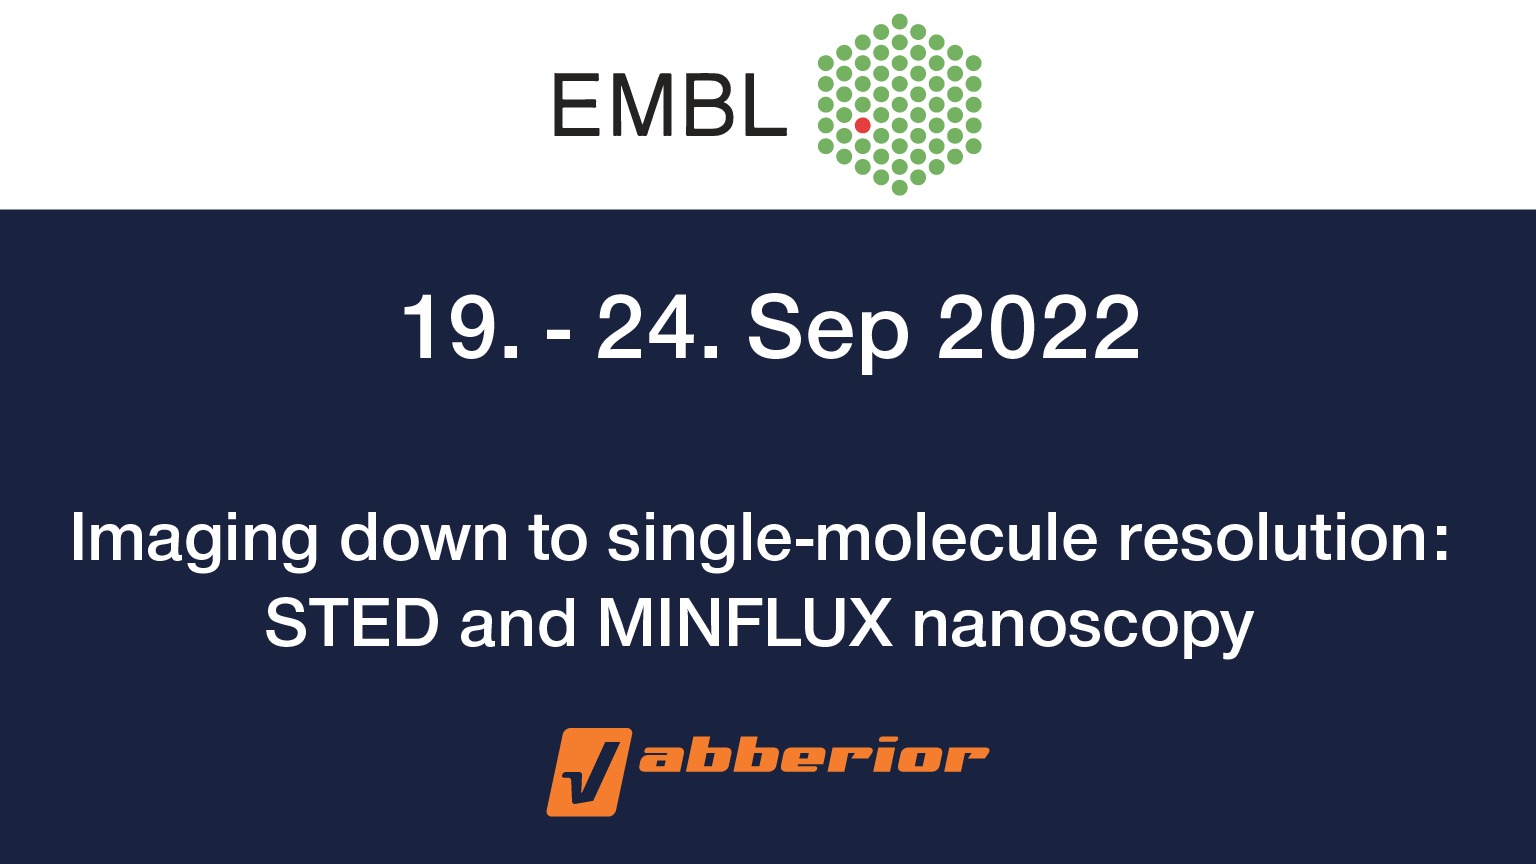 Join abberior's EMBL Course in Heidelberg about STED and MINFLUX nanoscopy